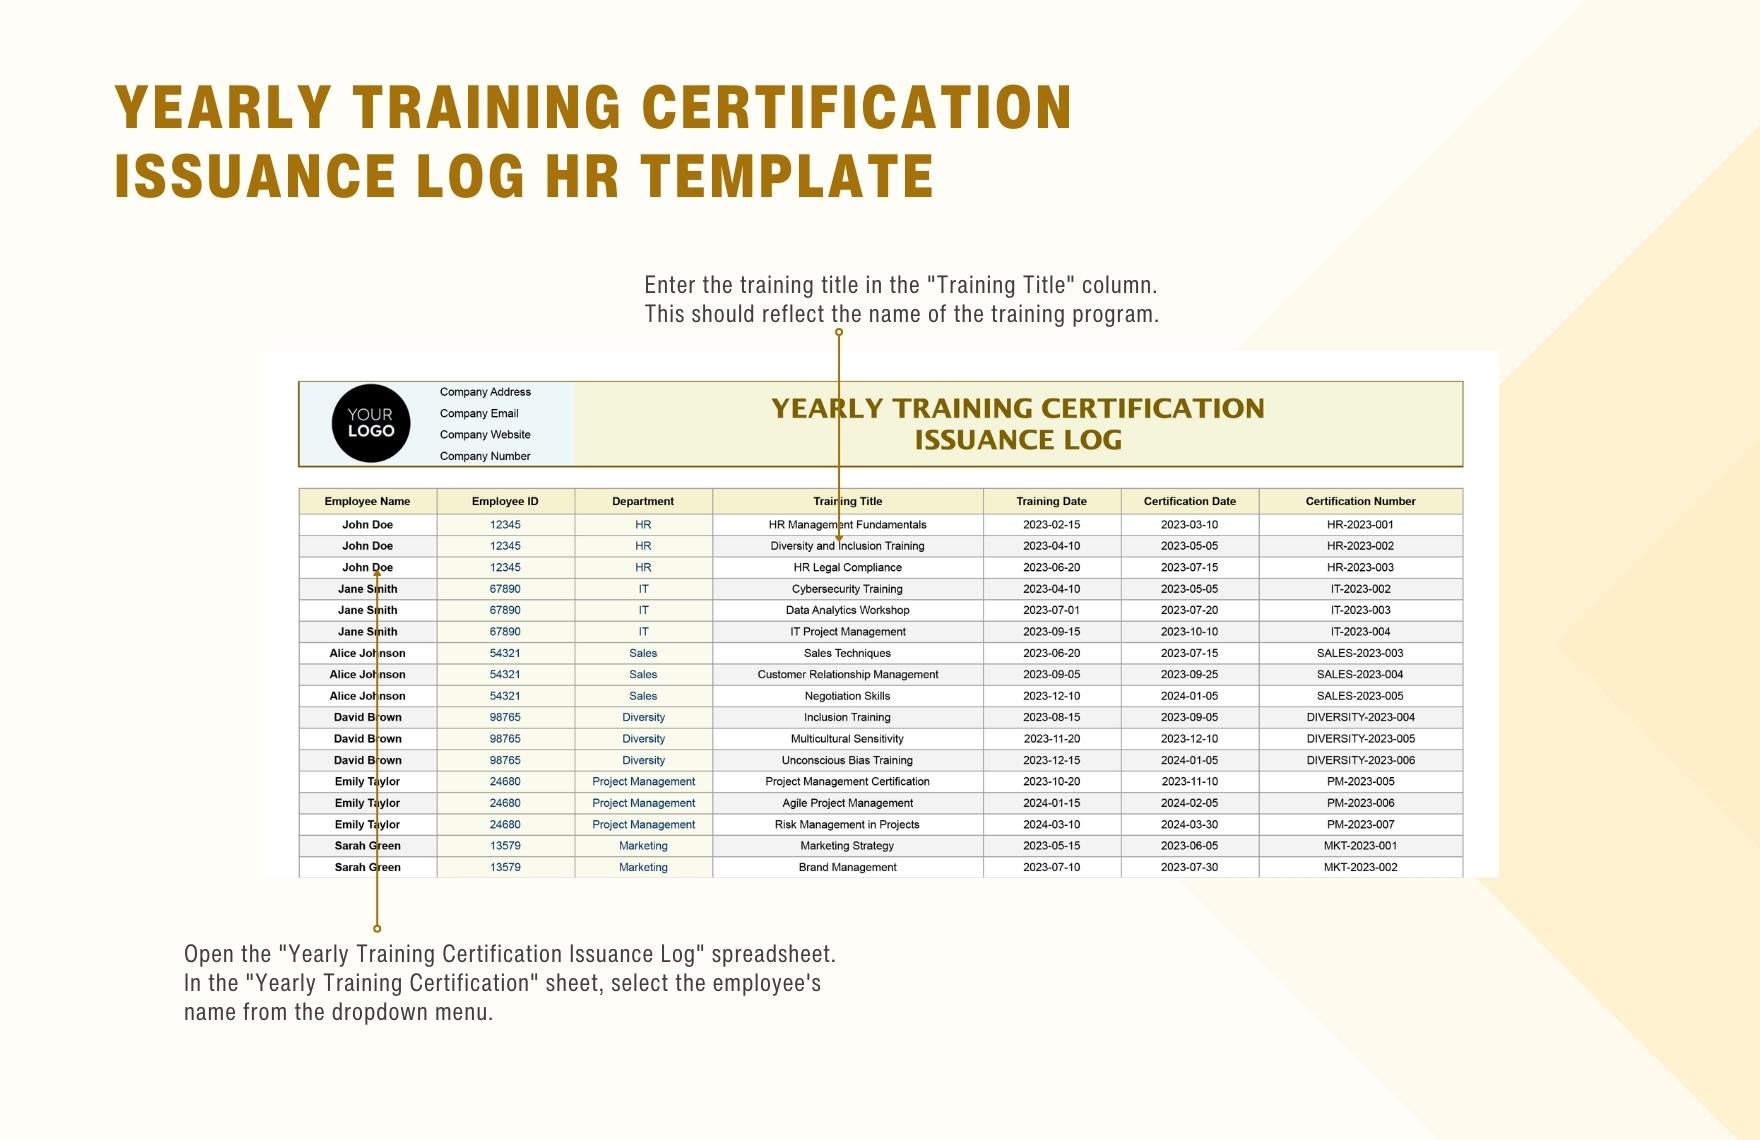 Yearly Training Certification Issuance Log HR Template